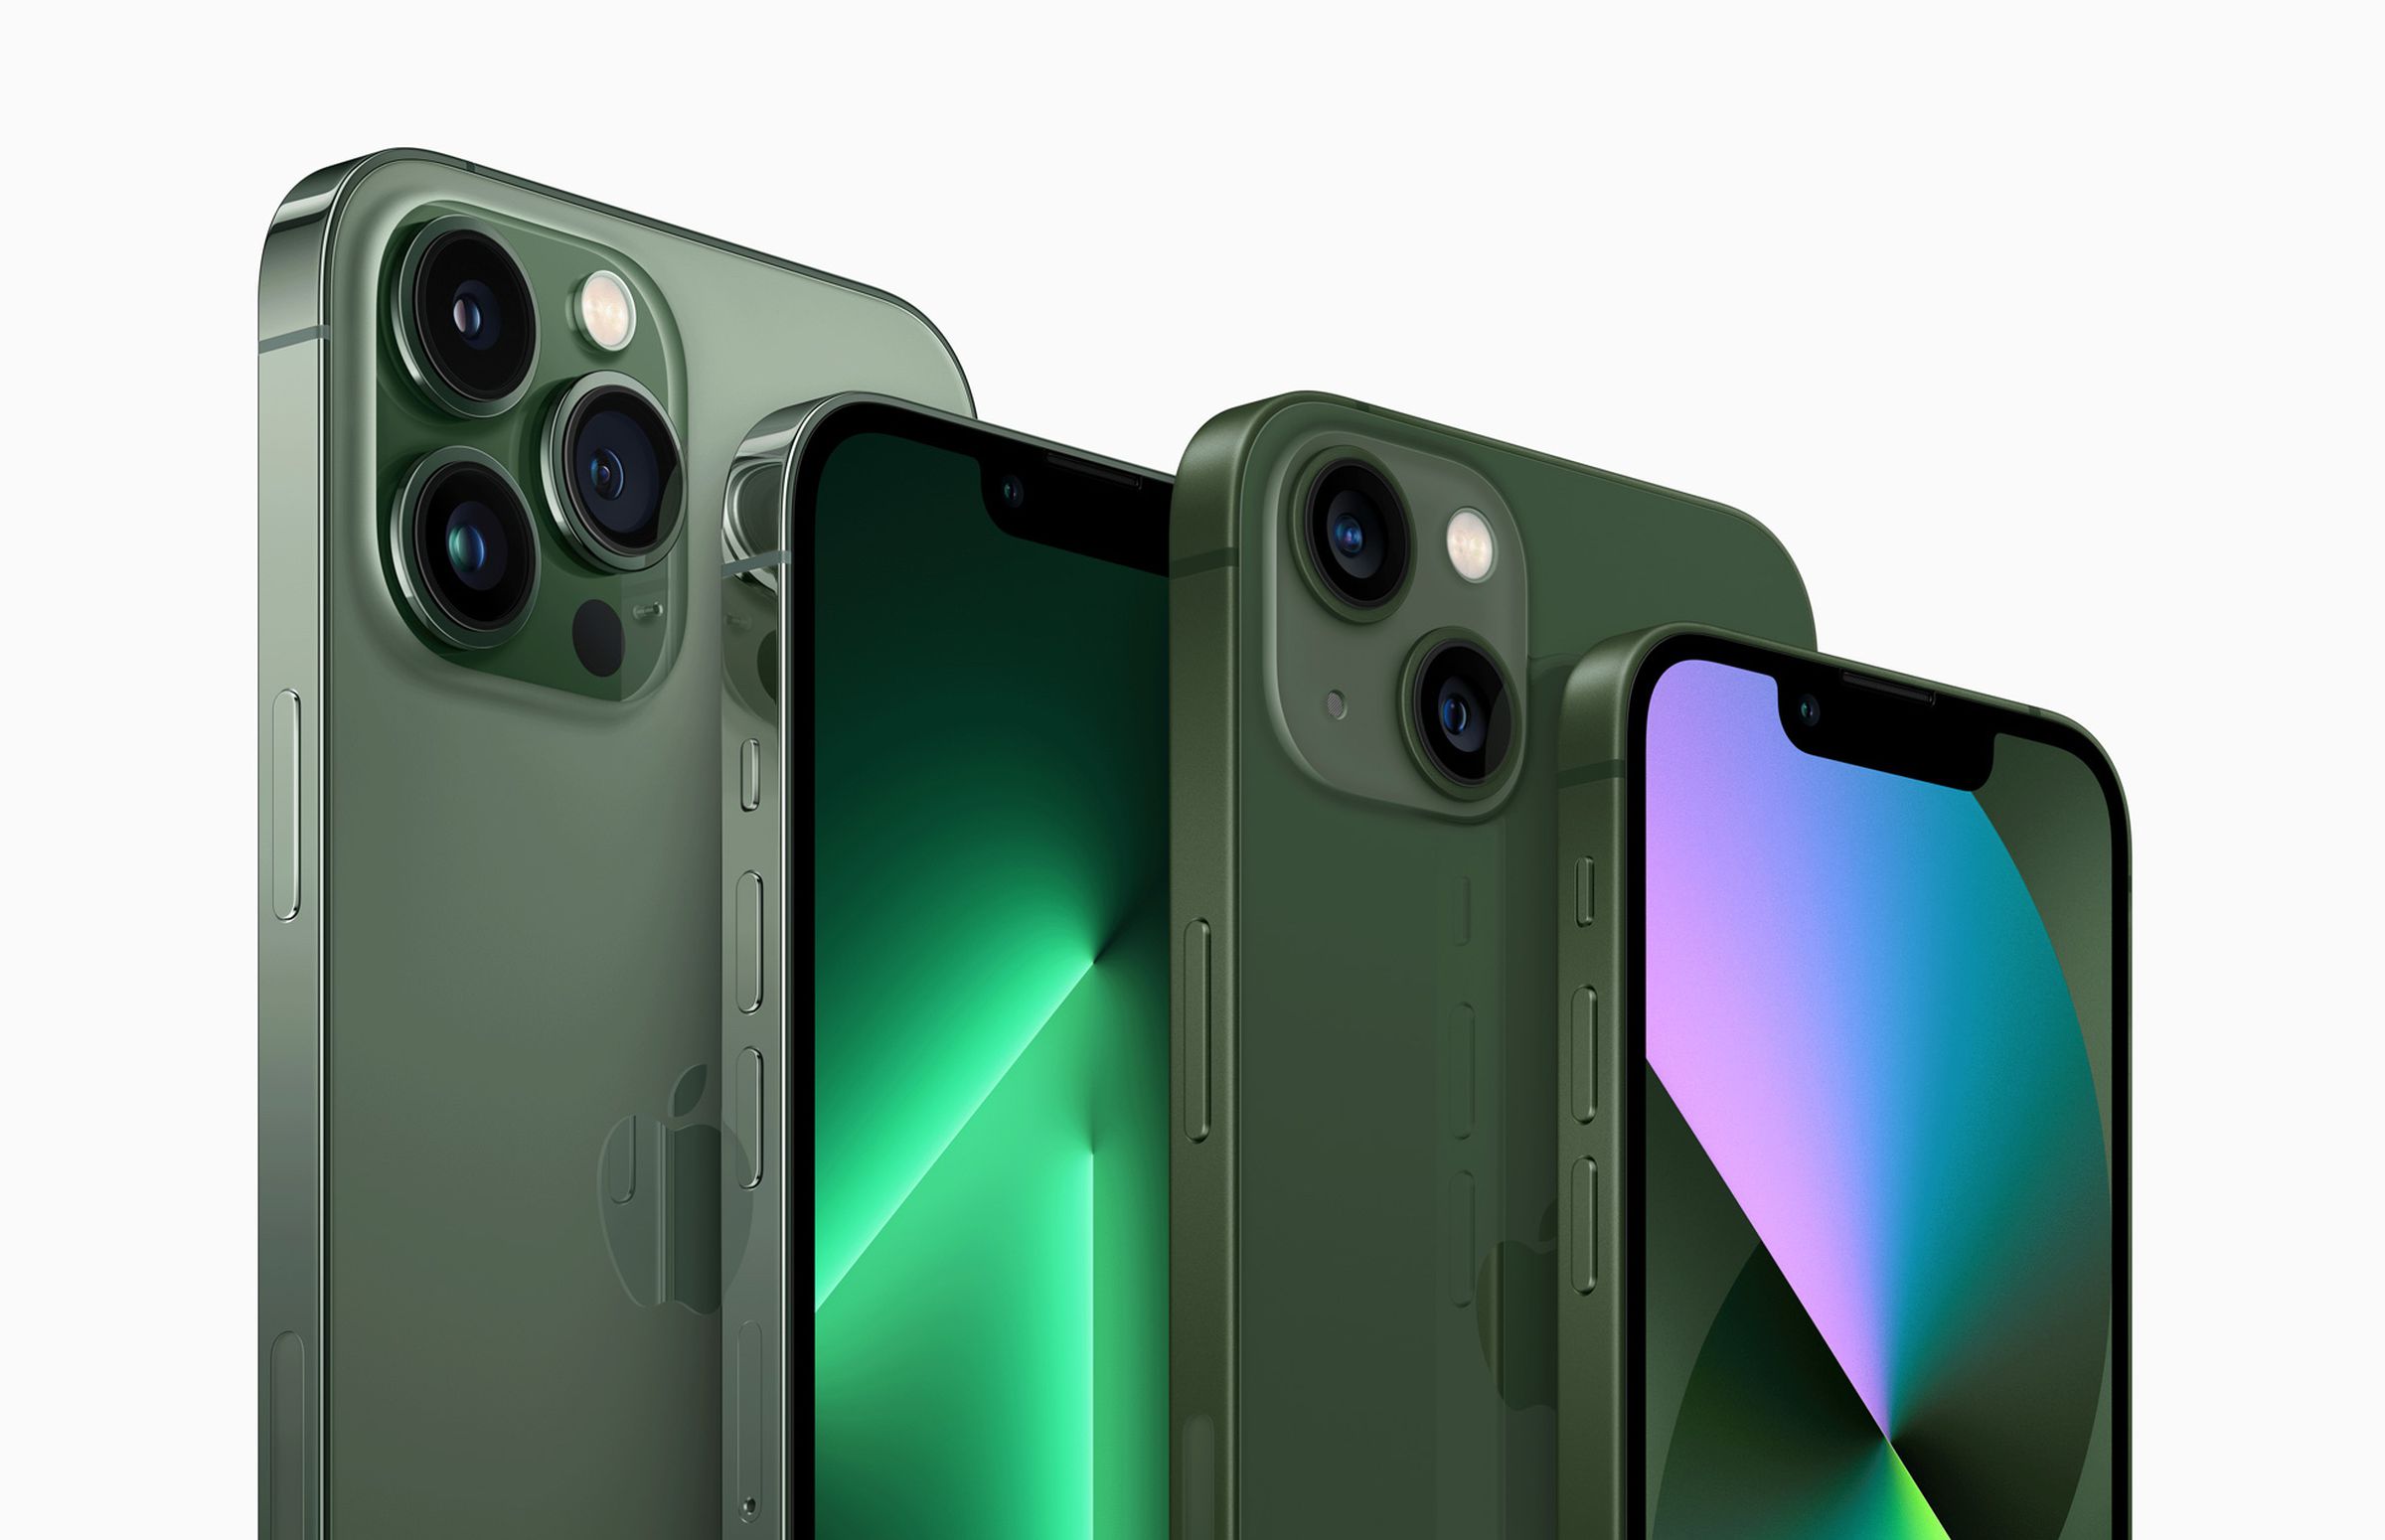 The regular and Pro iPhones both get green finishes.